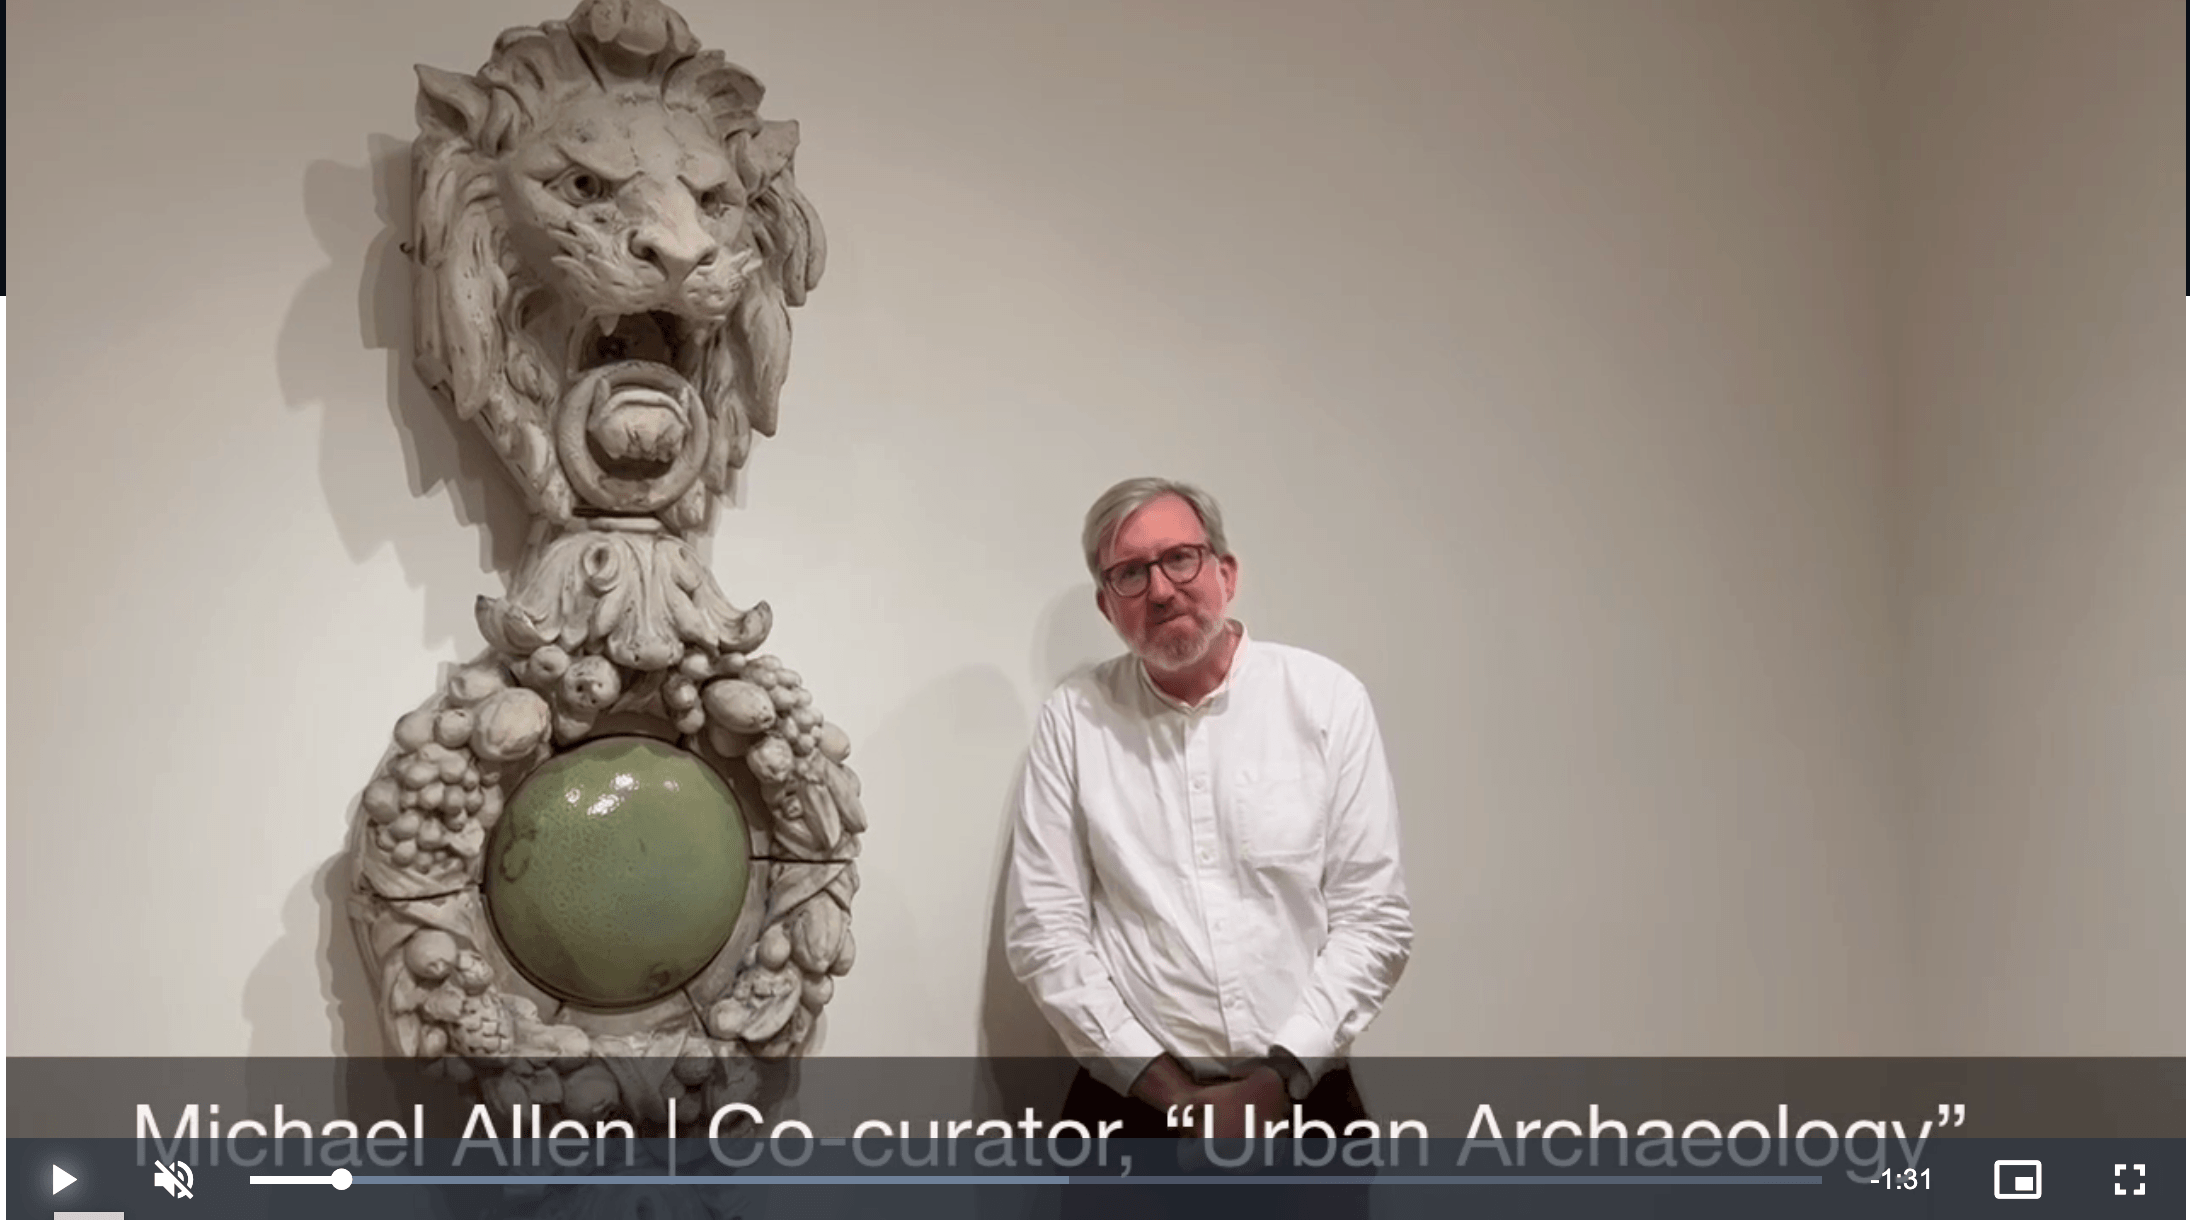 Michael Allen, co-curator of "Urban Archaeology" at the Pulitzer Arts Foundation, discusses the exhibition on the St. Louis Post-Dispatch